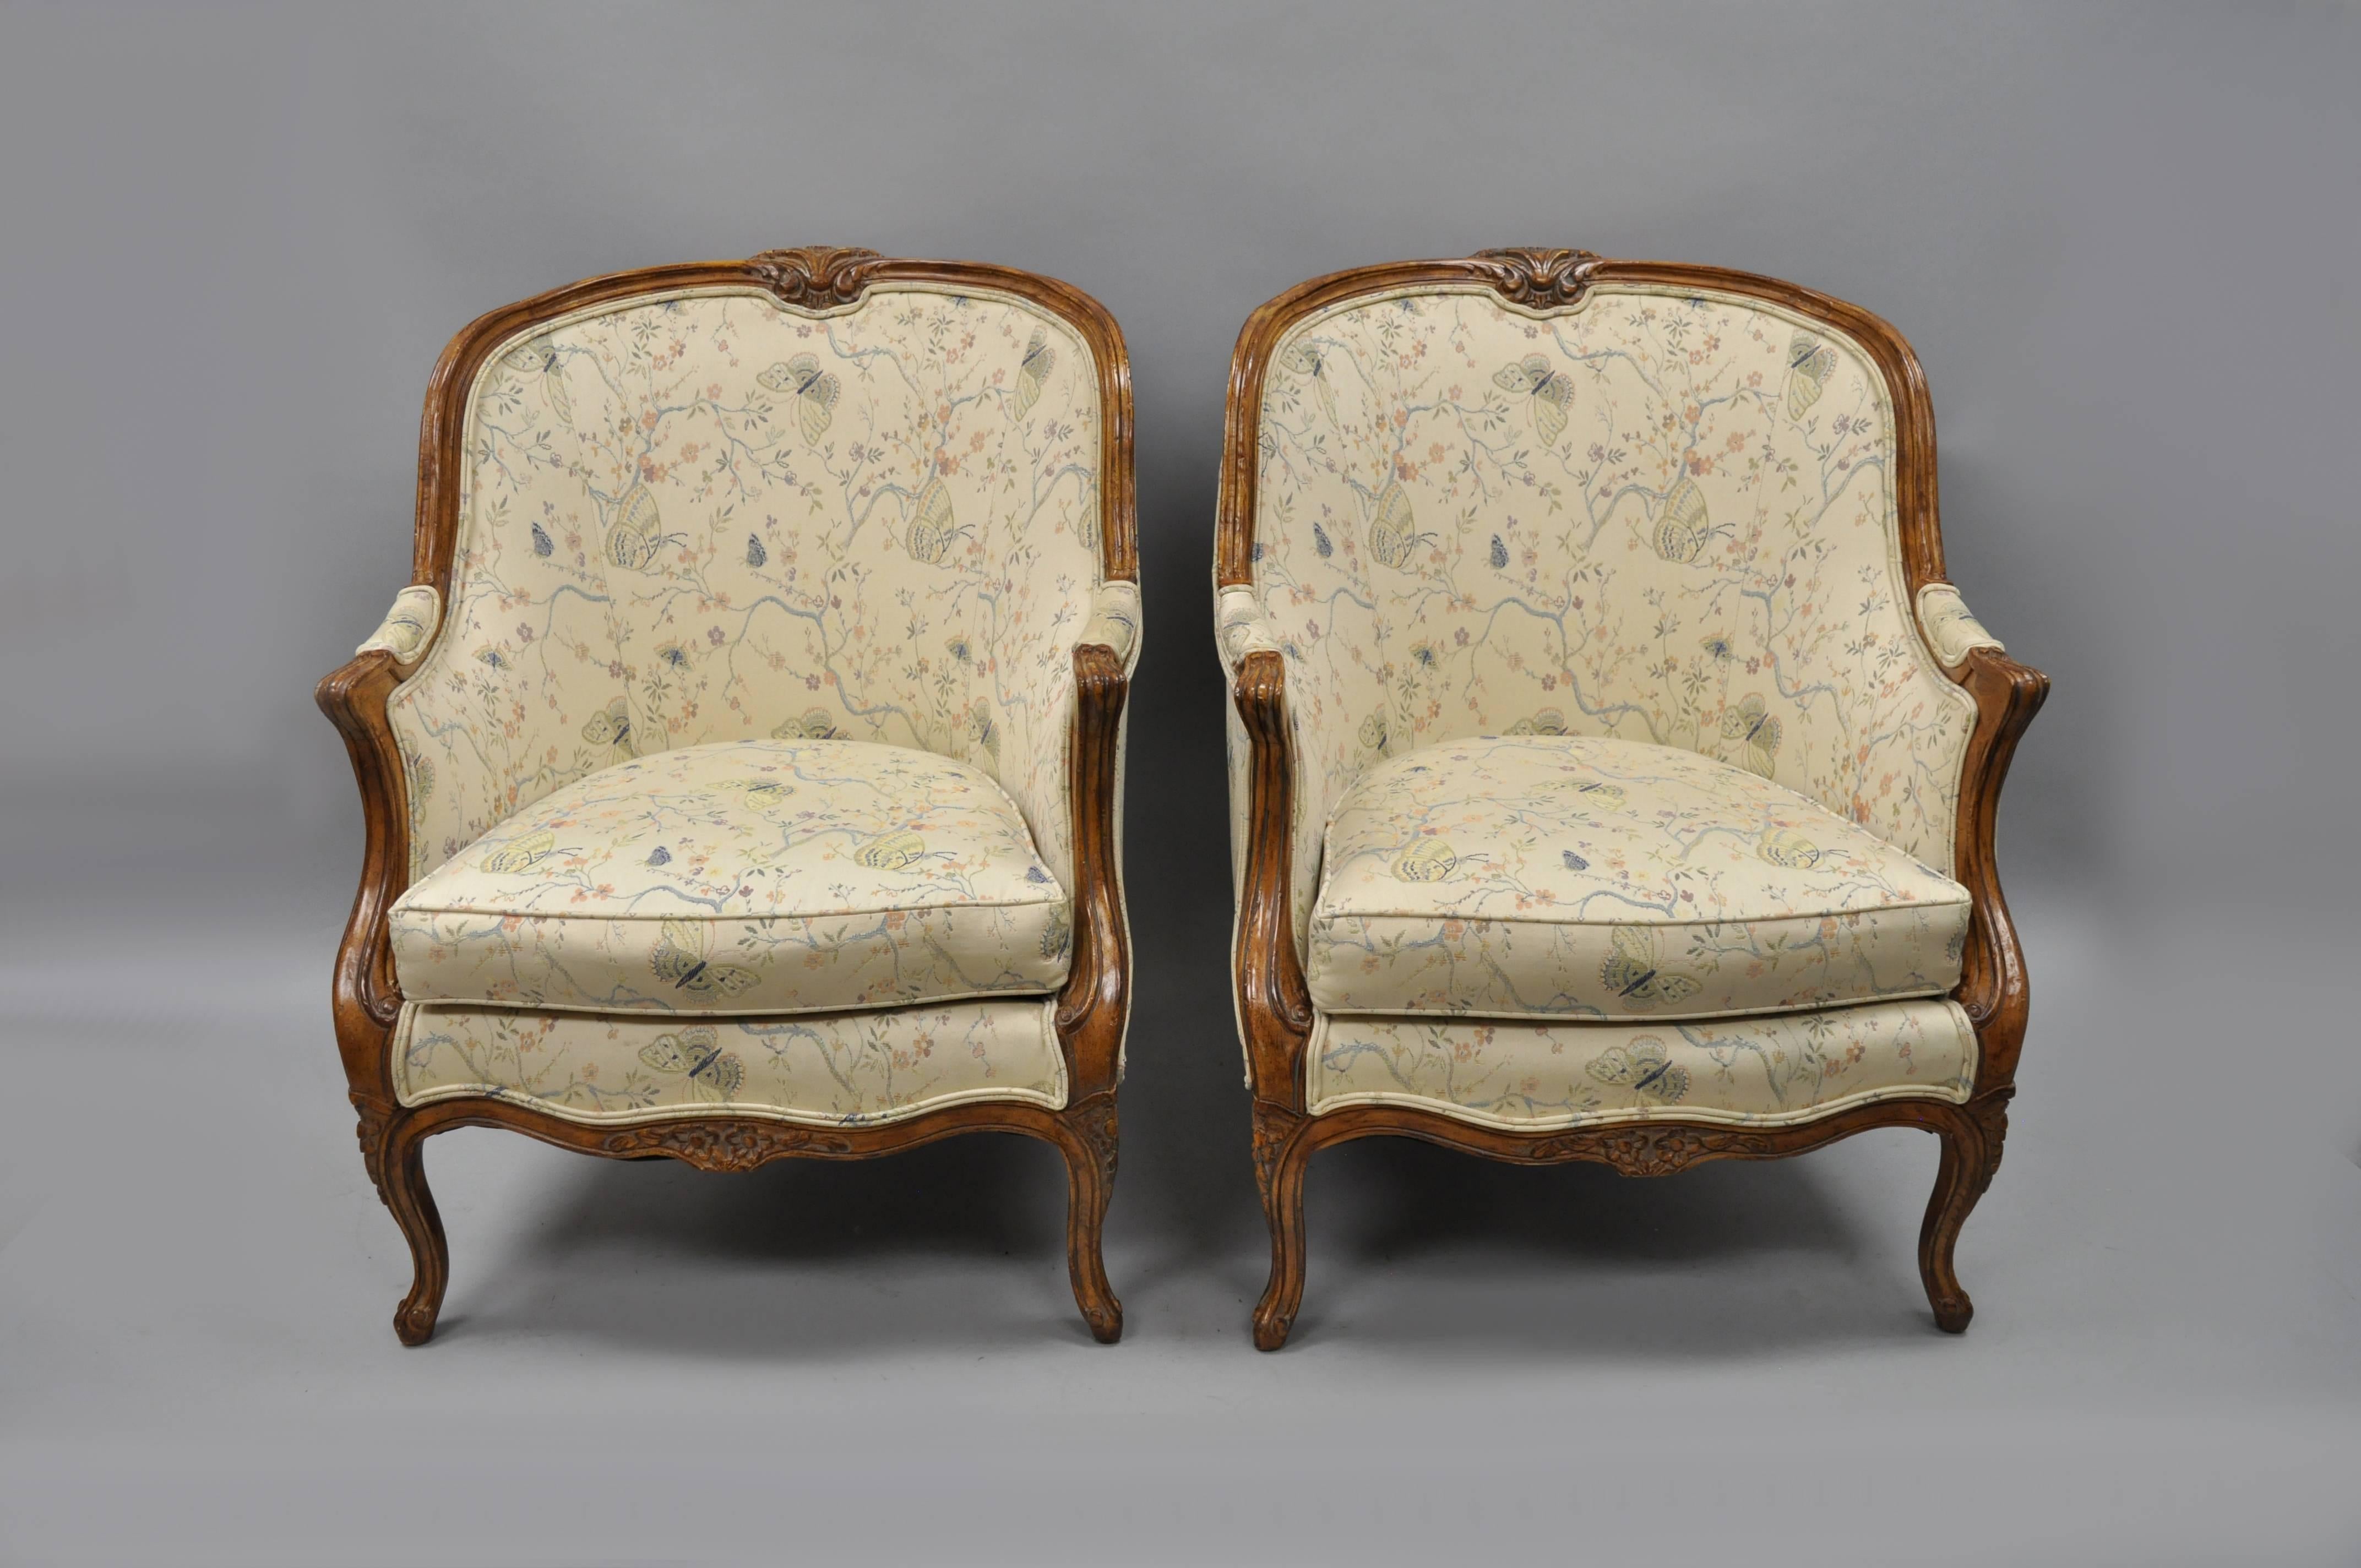 Pair of vintage oversized French Country / Louis XV style bergère armchairs. Chairs feature nice large scale, rounded barrel backs, cabriole legs, nicely carved accents, distressed finish, great style and form. Measure: 40